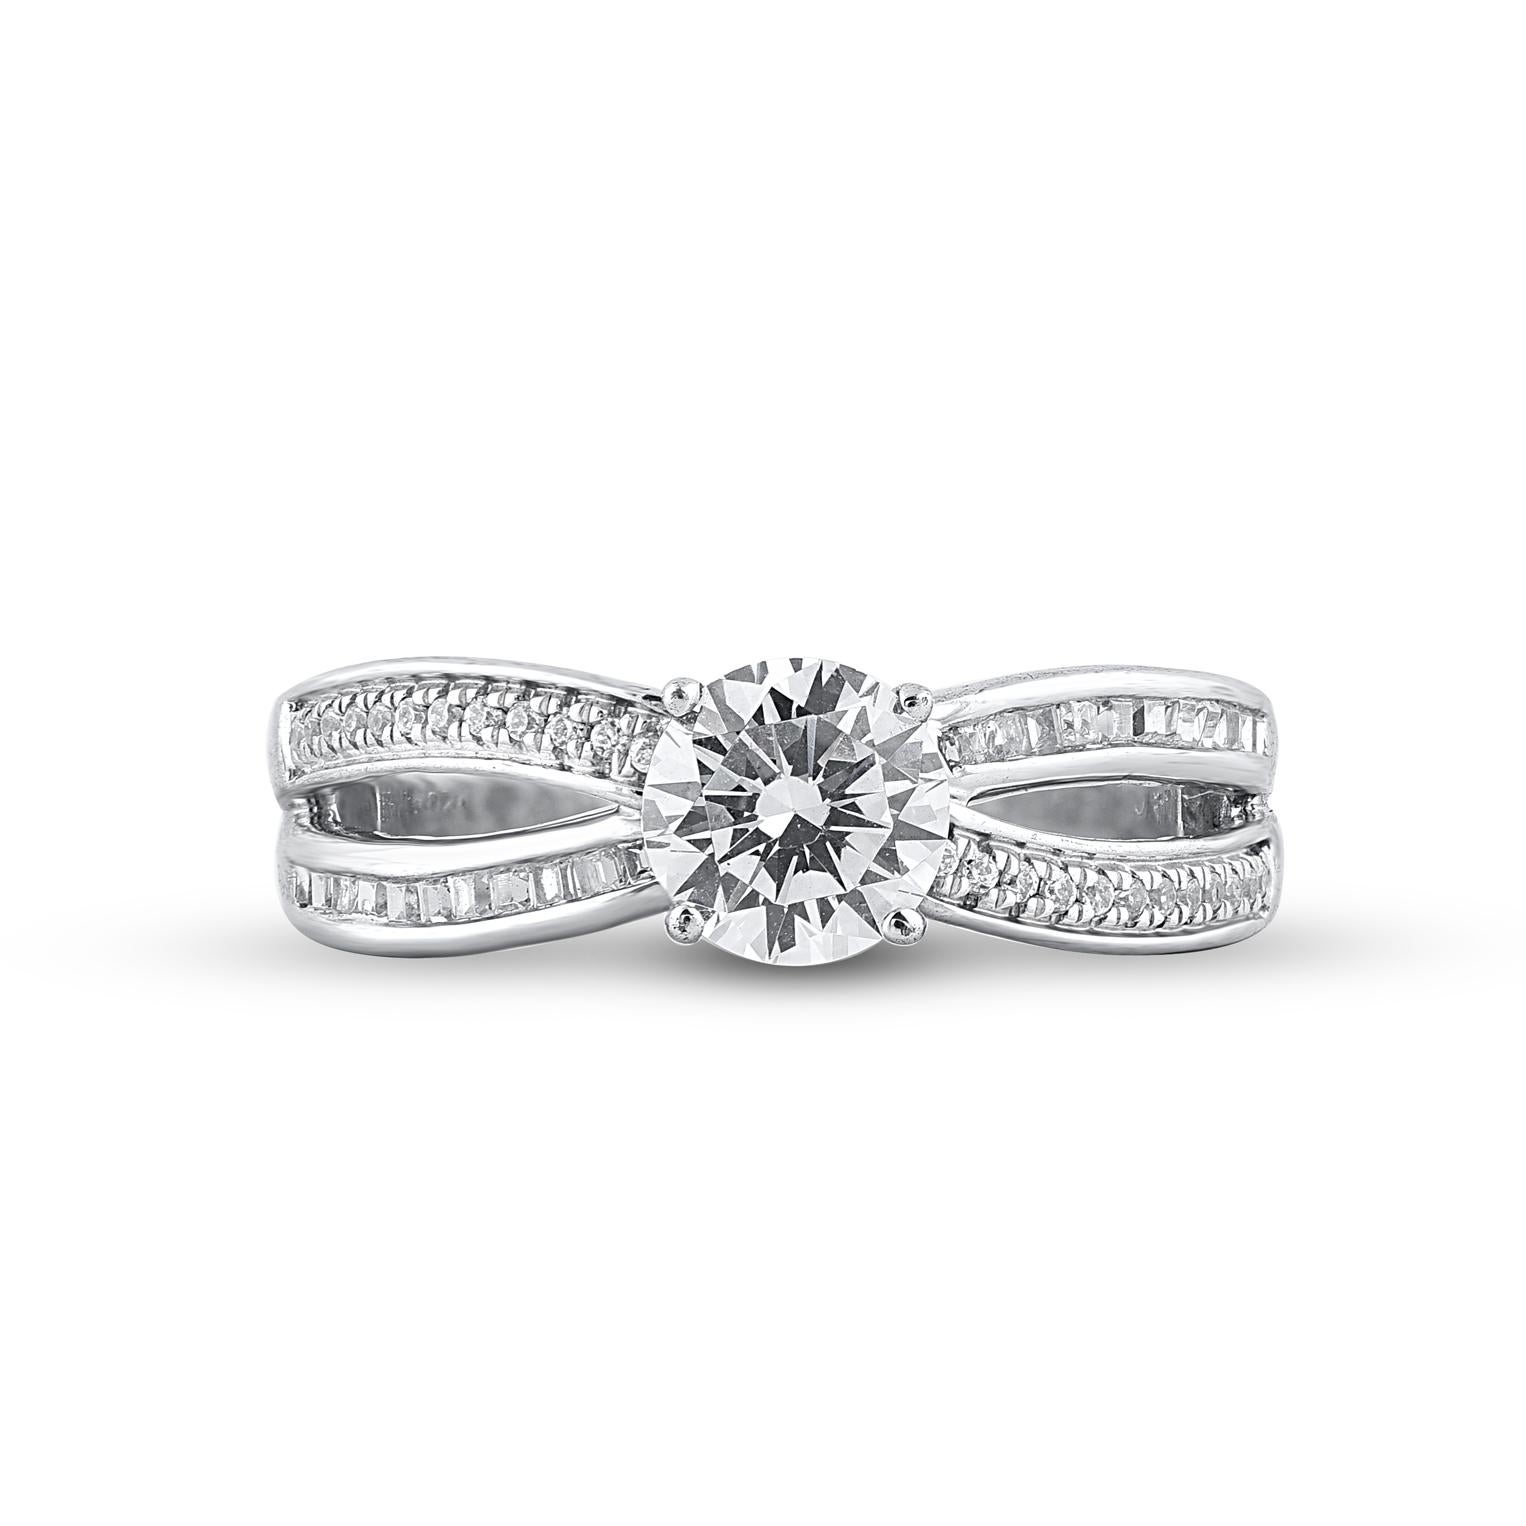 Express your love for her in the most classic way with this engagement ring. This ring is expertly crafted in 14 Karat white gold and features of this ring 51 brilliant cut, single cut and baguette cut diamond set in pave, prong & channel setting.